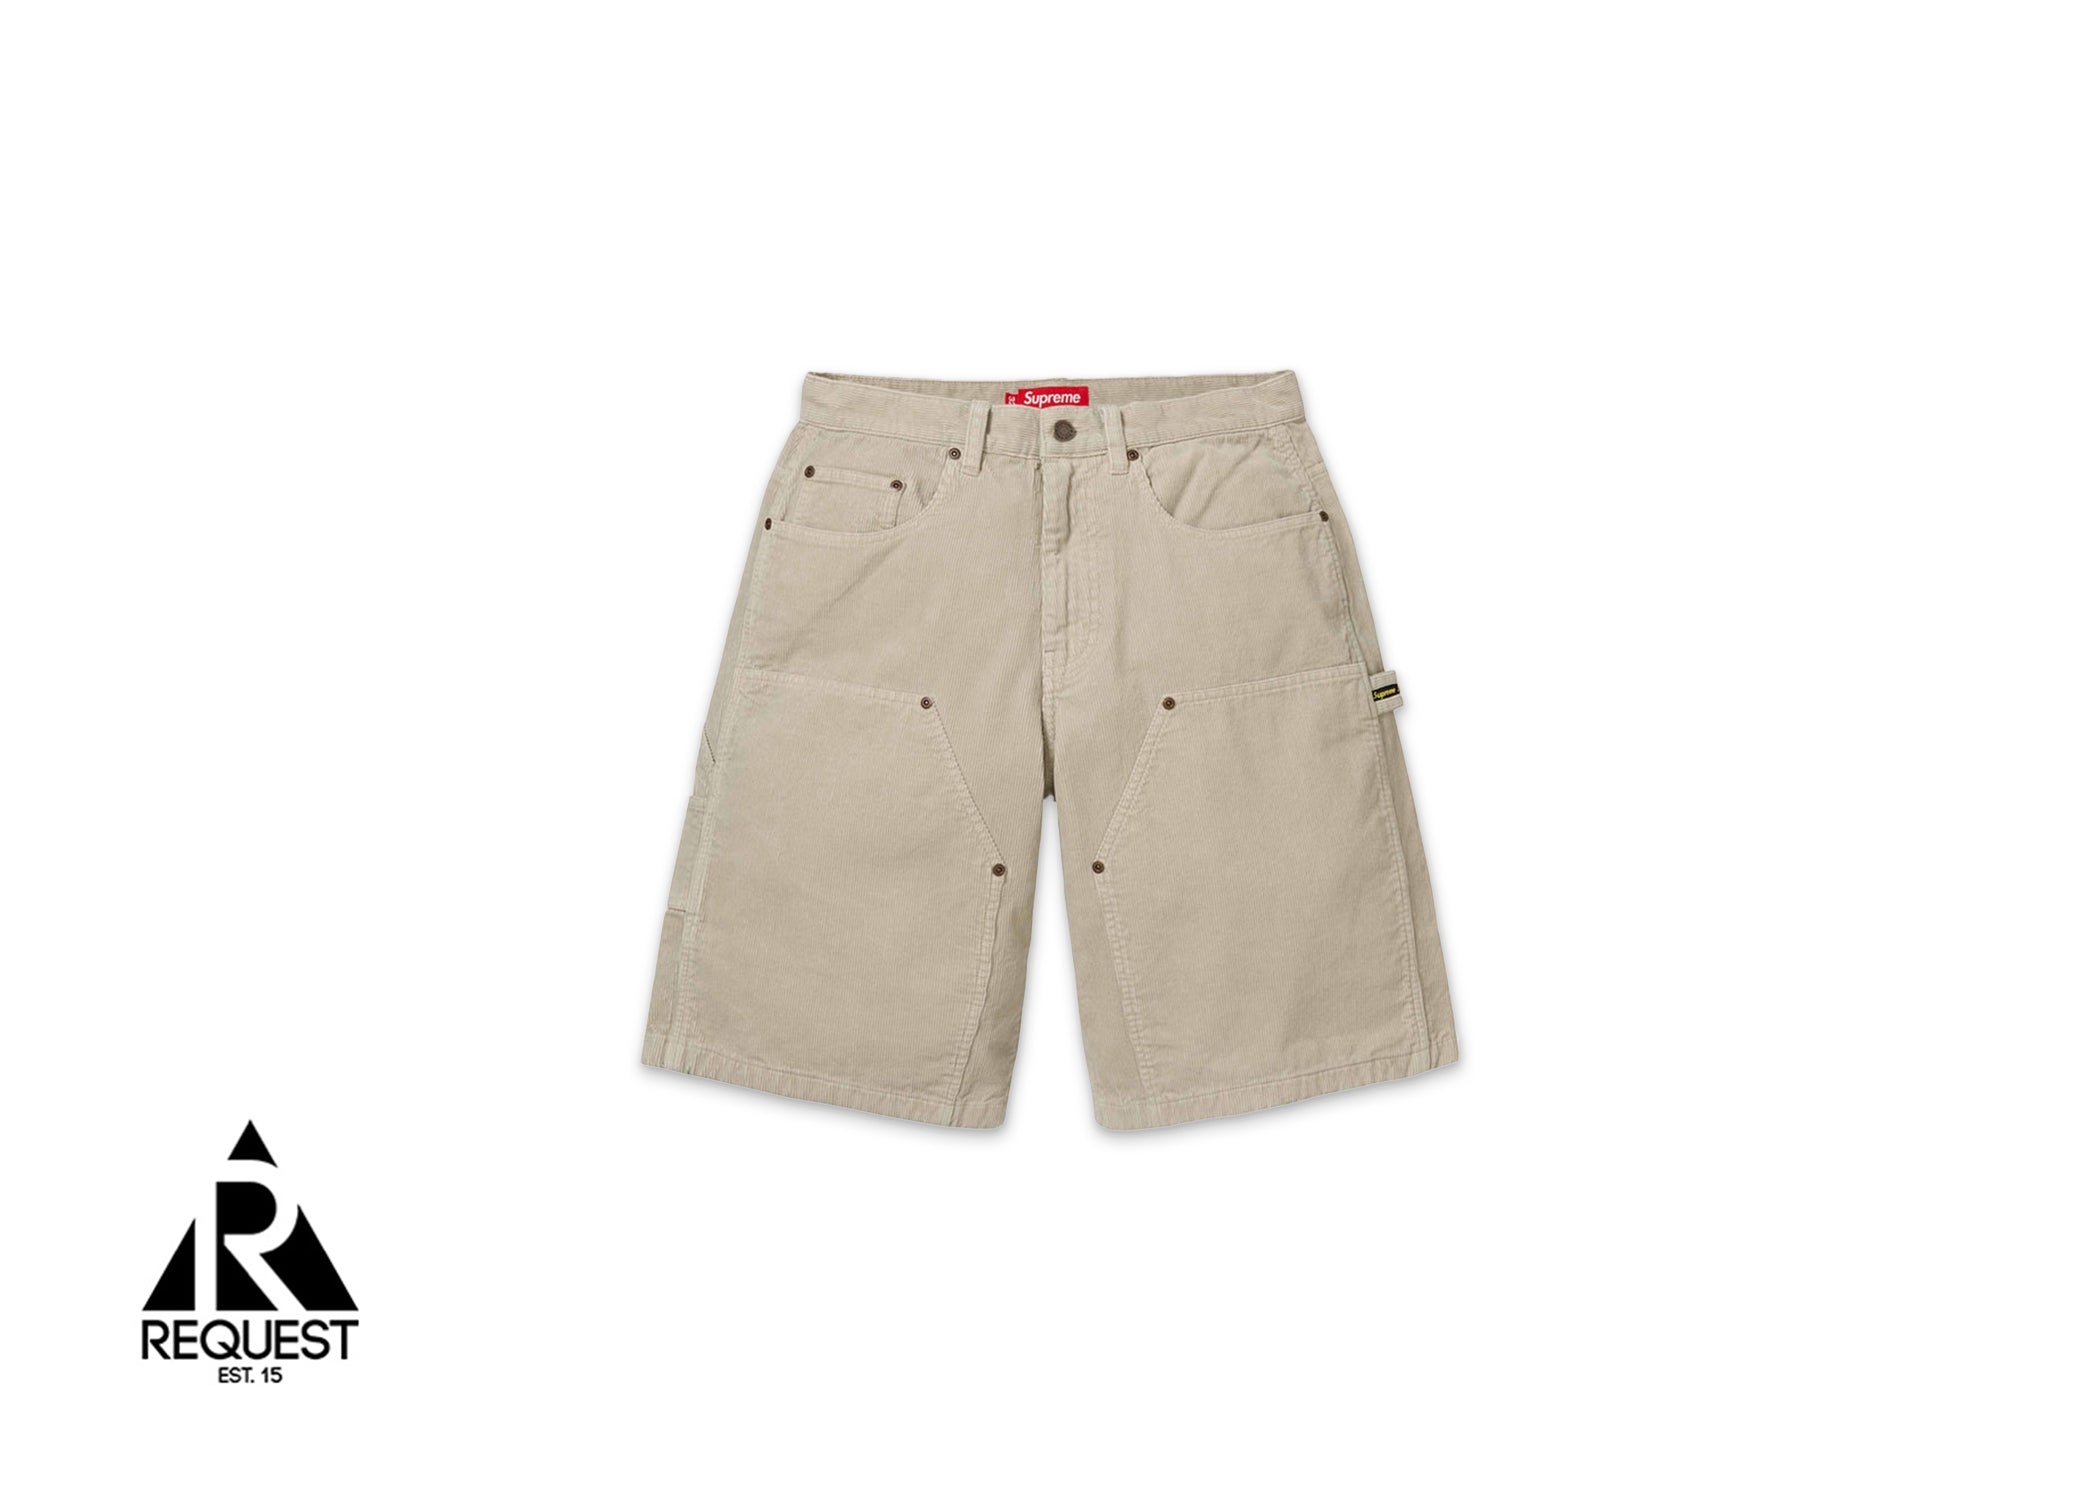 Washed Corduroy Double Knee Shorts "Tan"